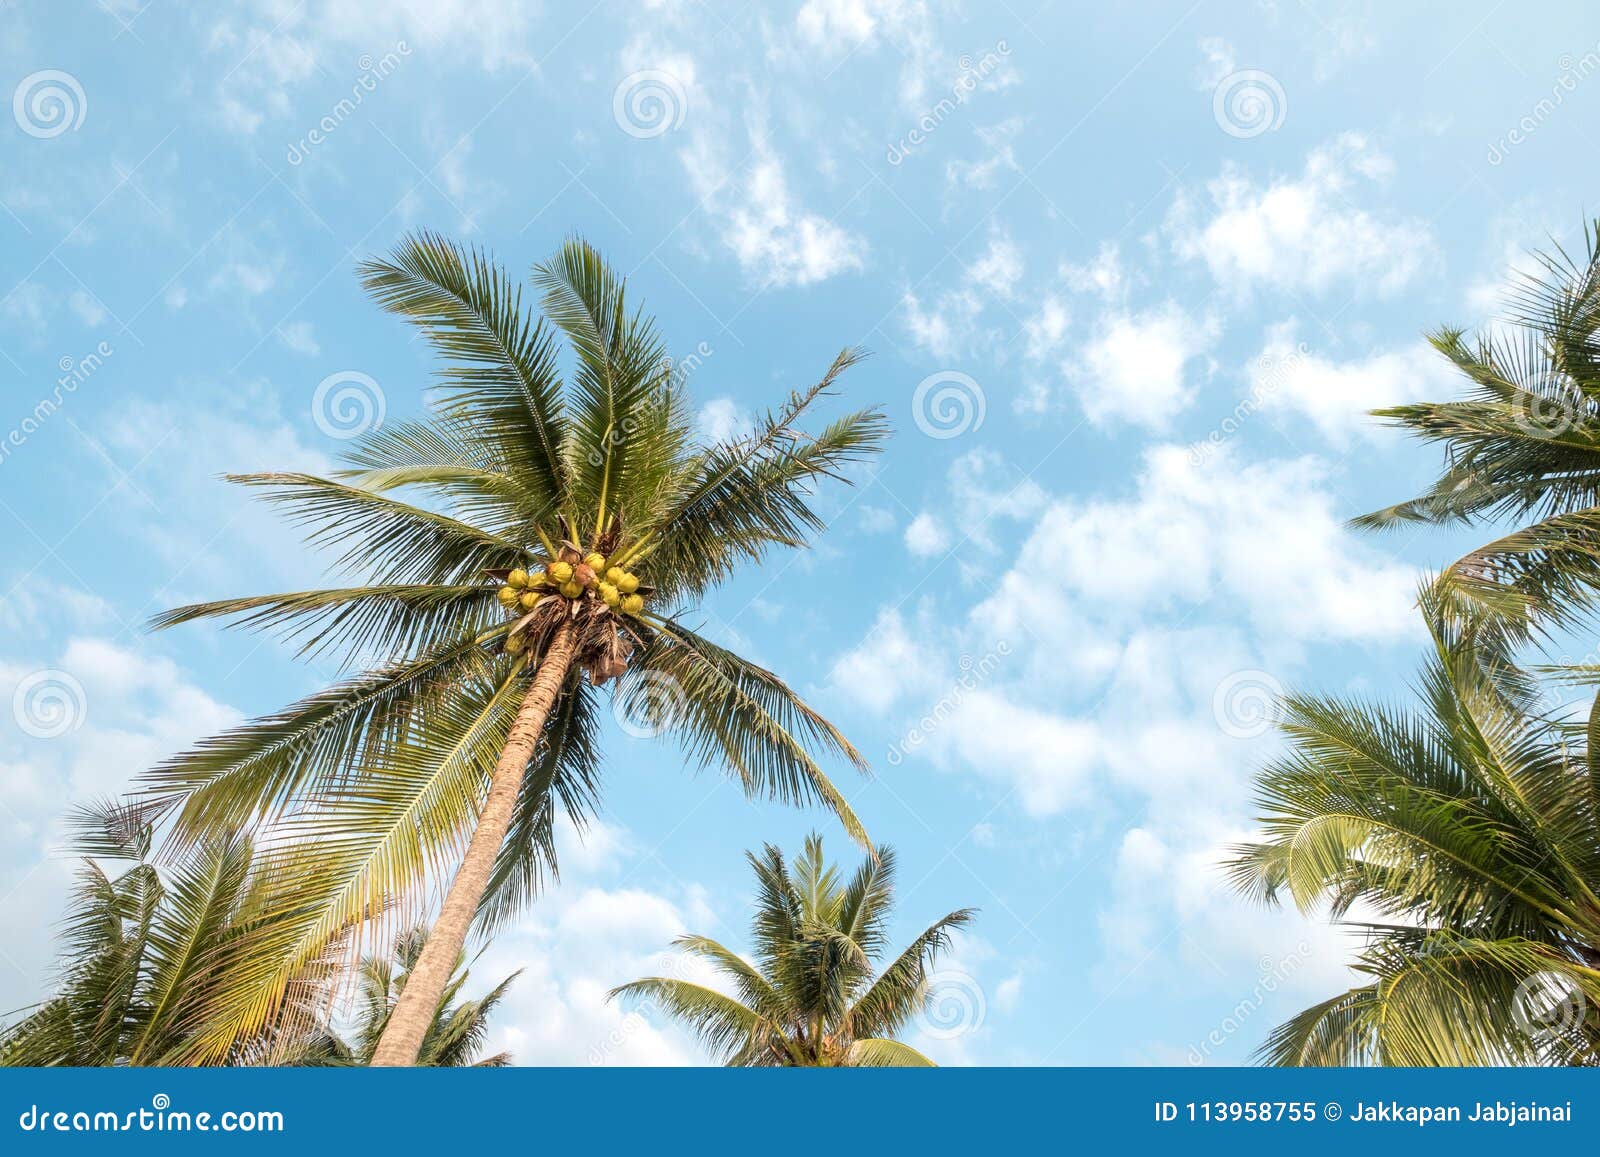 Coconut Palm Tree on Tropical Beach Blue Sky with Sunlight of Morning ...